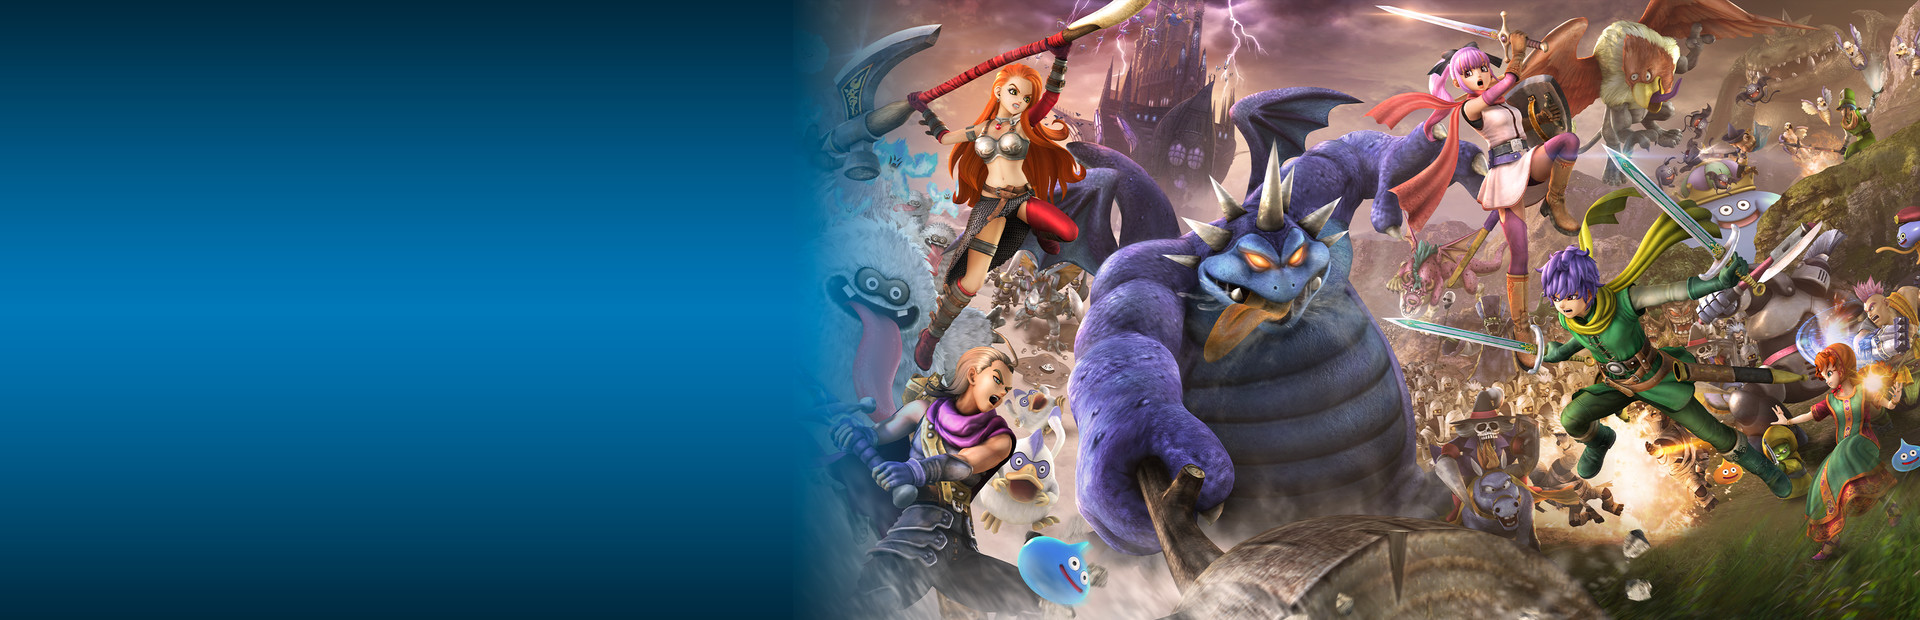 DRAGON QUEST HEROES™ II cover image